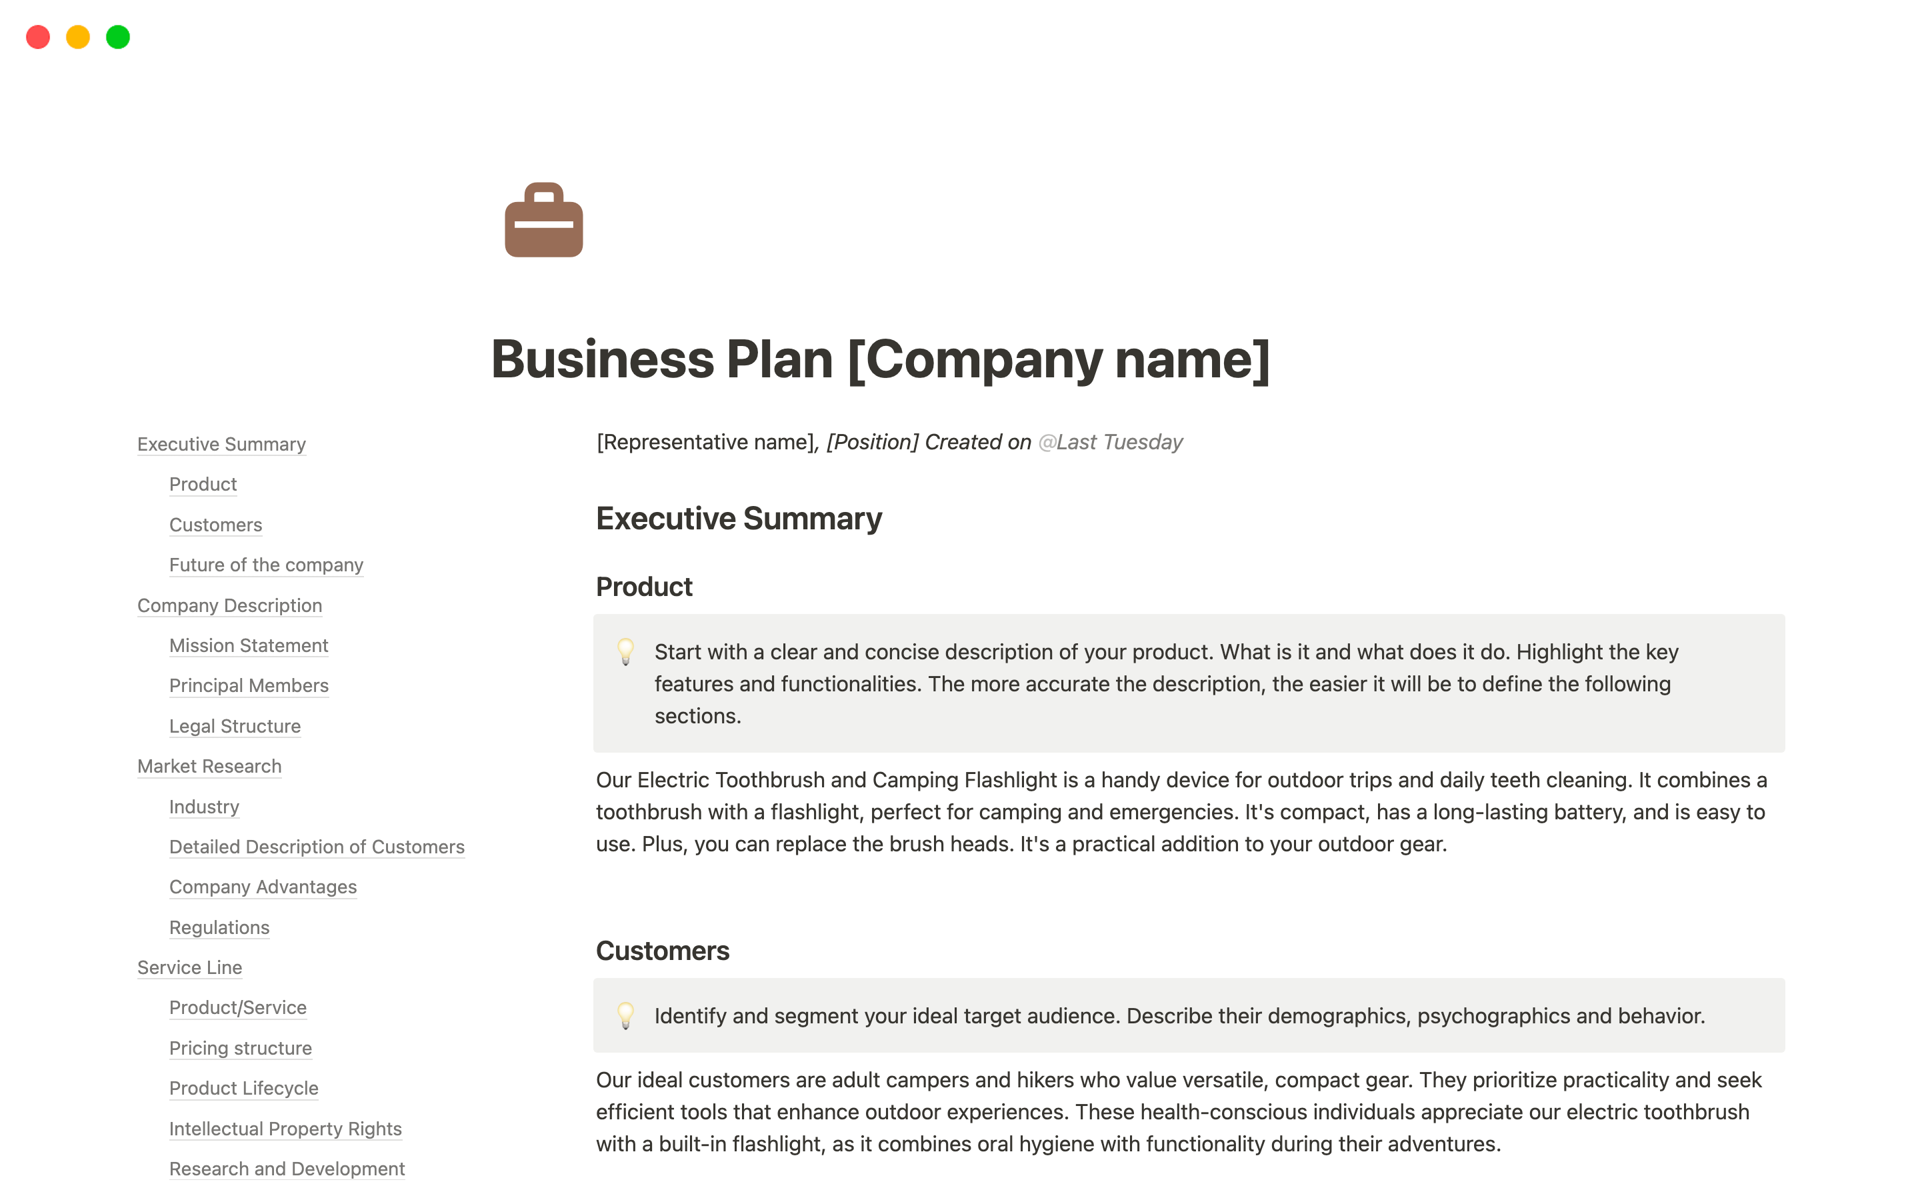 A business plan template with instructions on how to use it and Notion AI.